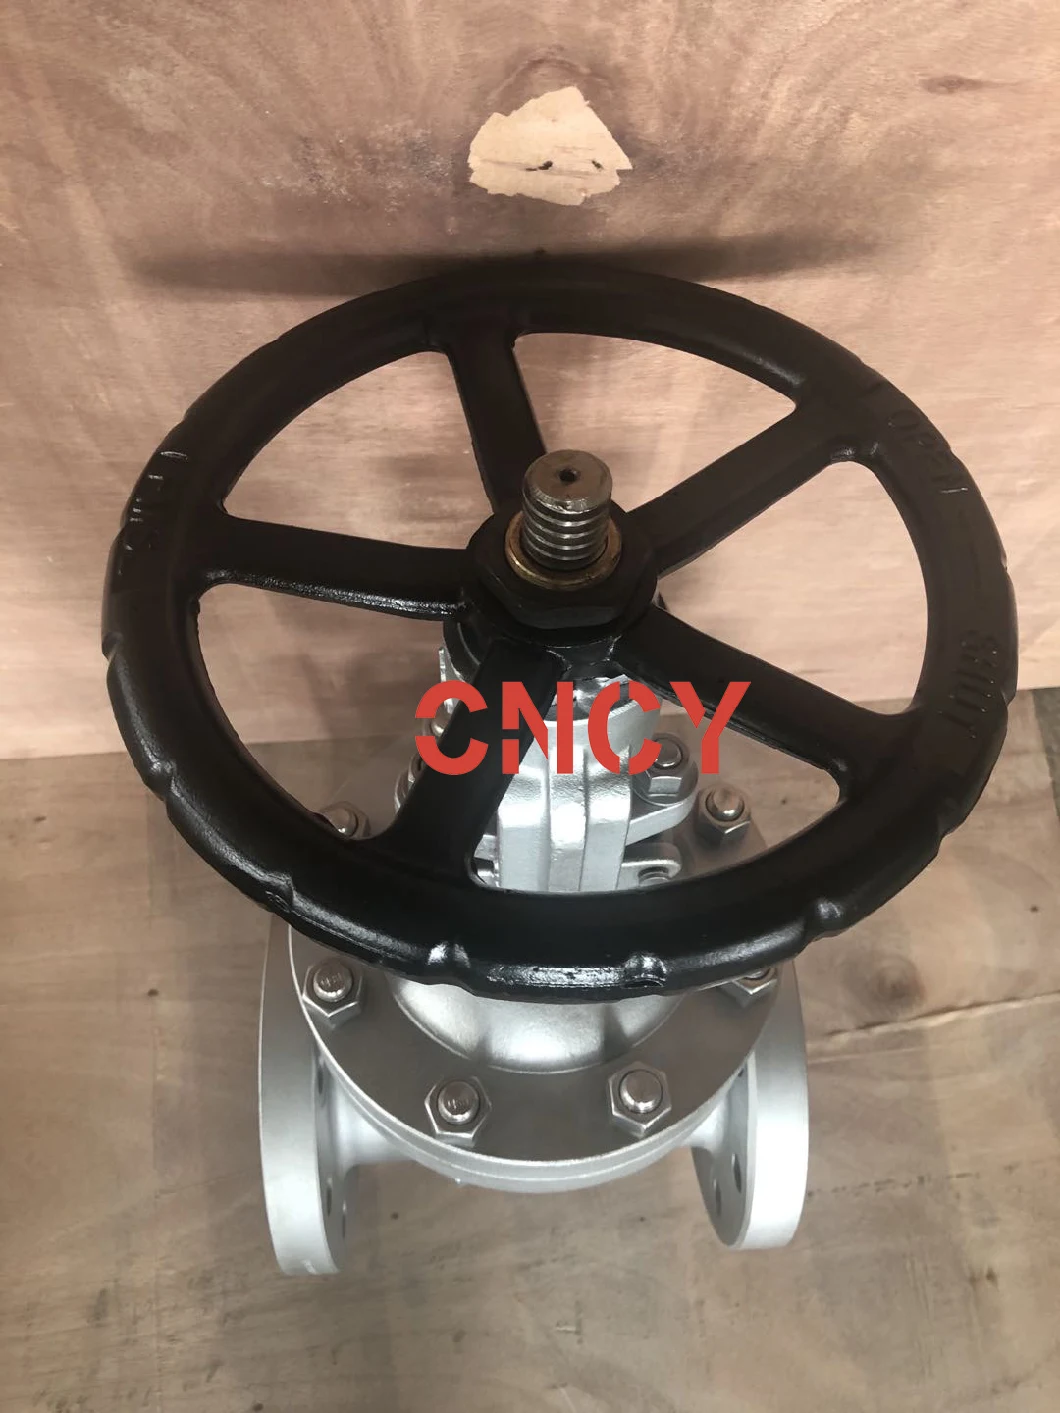 ANSI Non Drilled Flange OEM Factory Stainless Steel Gate Valve Bolted Bonnet Industrial Valve Flange Valve Industrial Valve